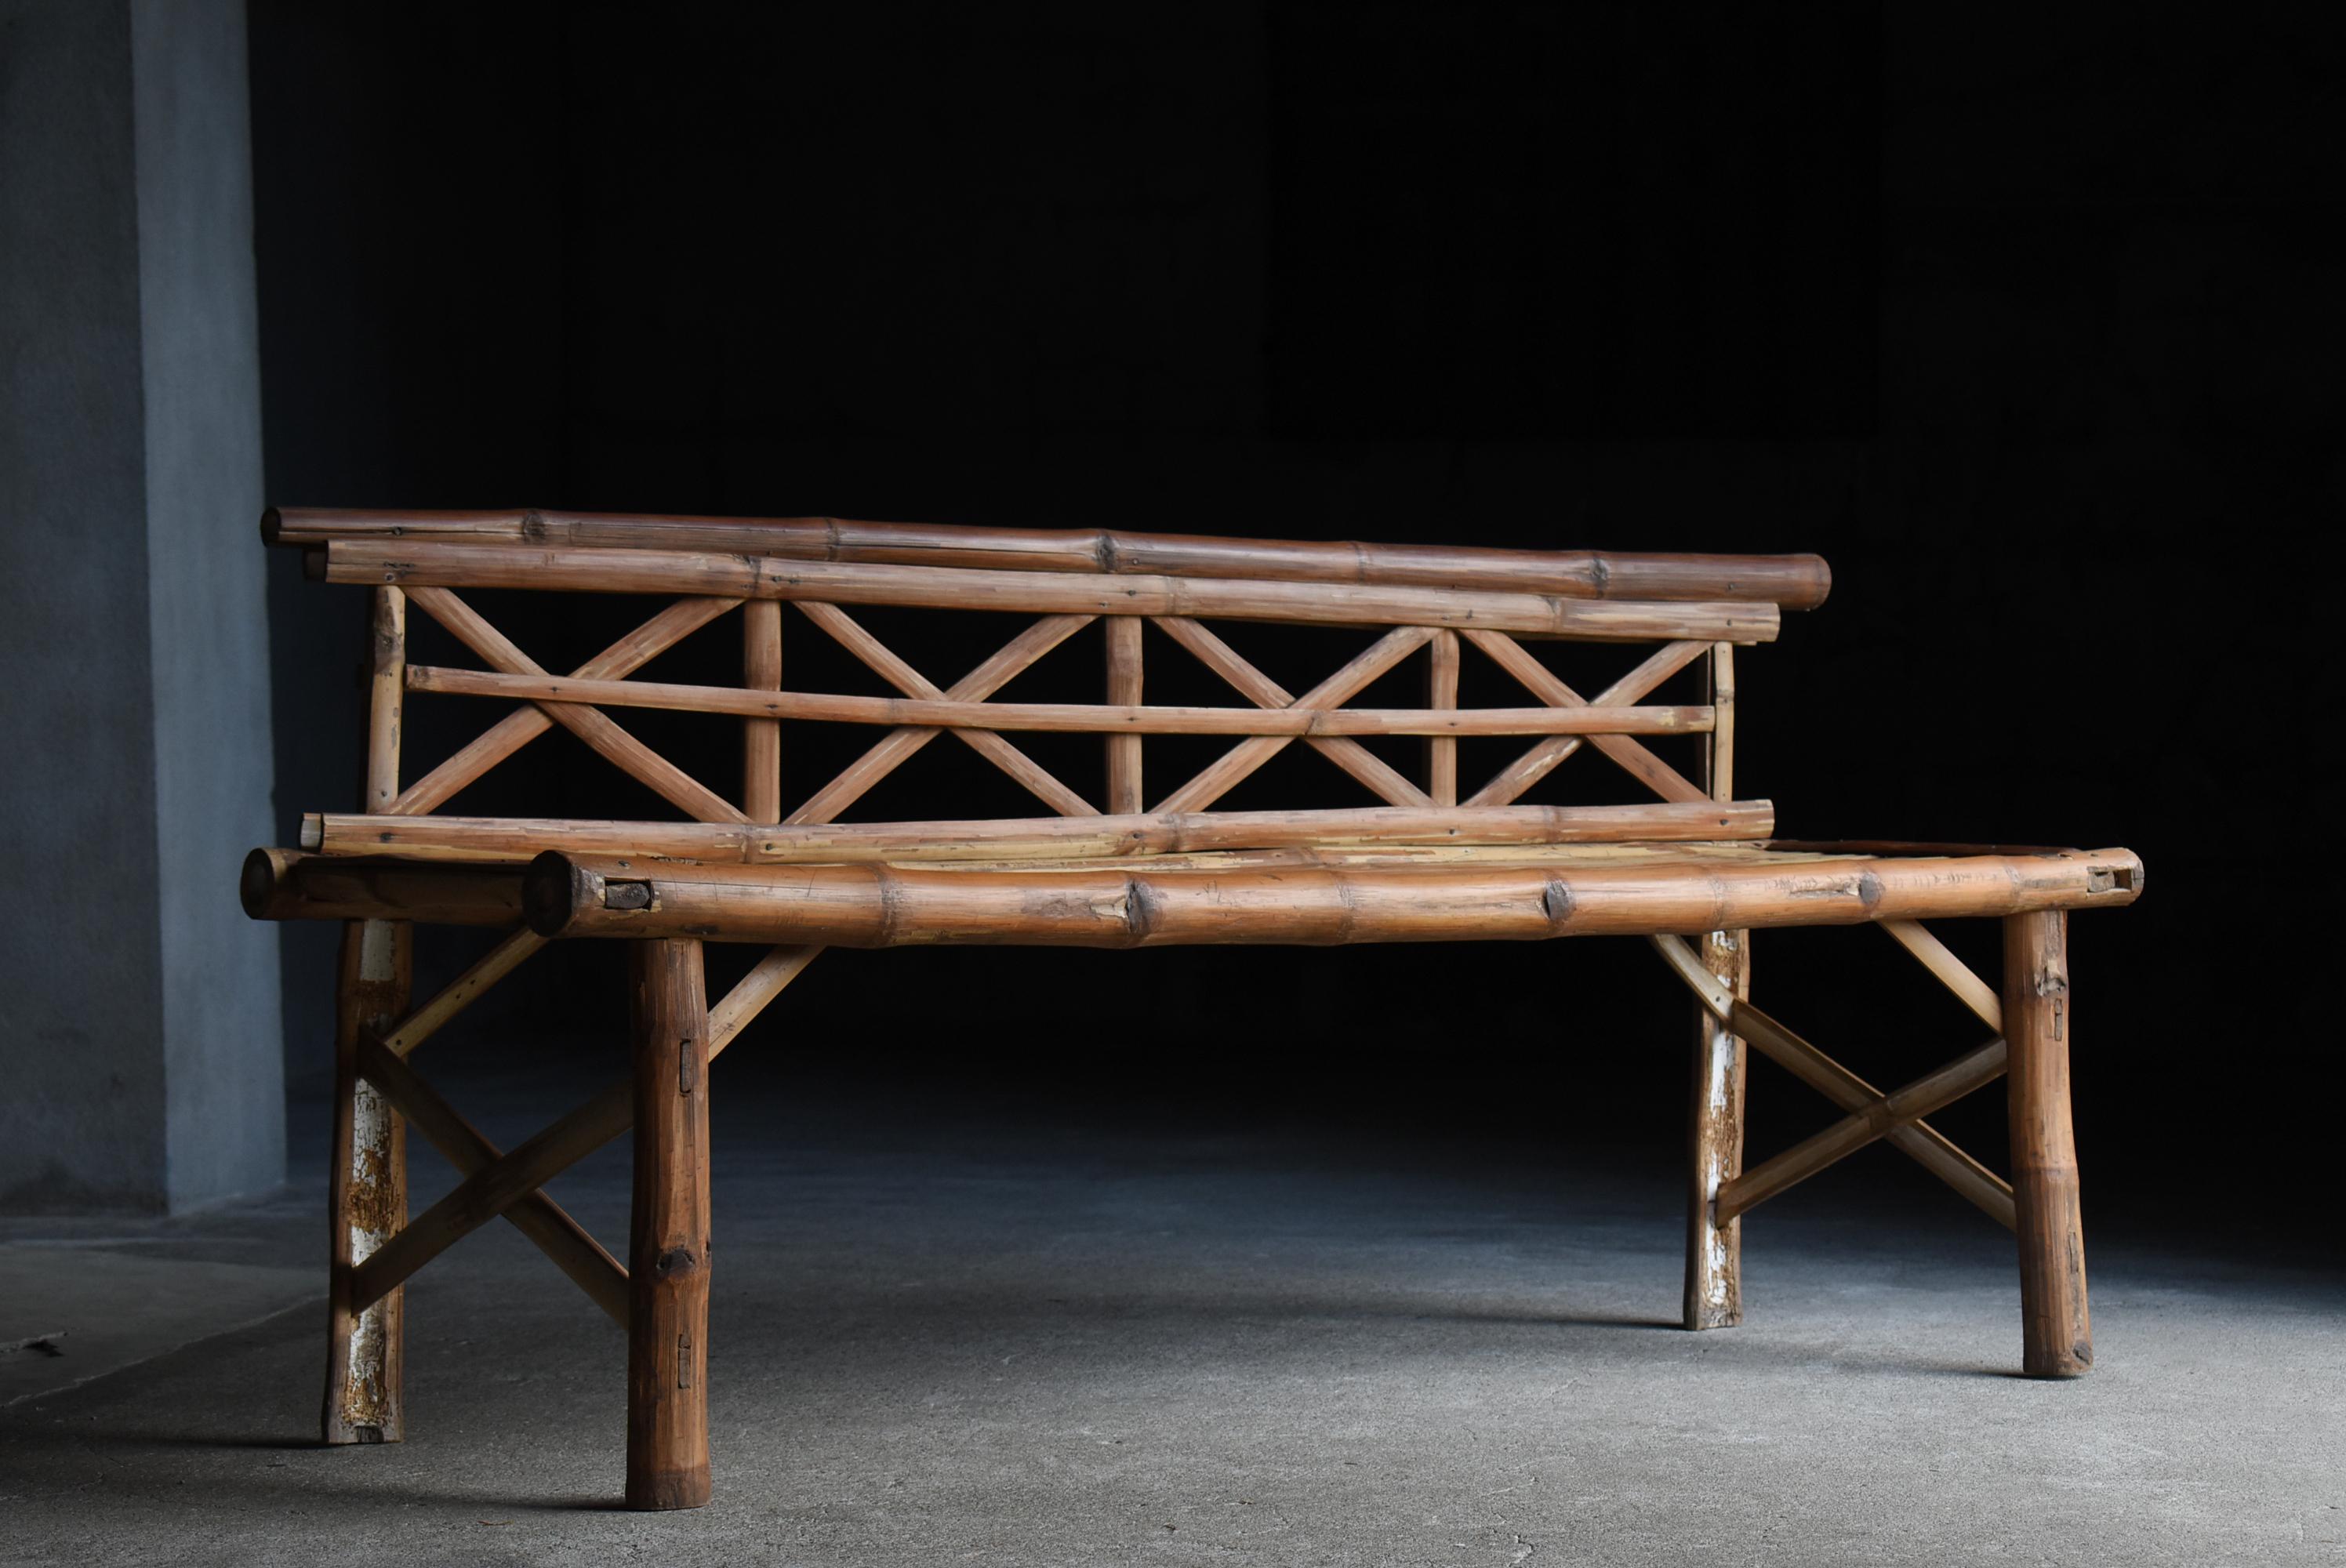 This is an old bamboo bench made in Japan.
This furniture is from the mid-Showa period (1940s-1960s).
It is made entirely of bamboo.

You can enjoy Japanese craftsmanship.
It is characterized by its lightness and thinness of line, which can only be